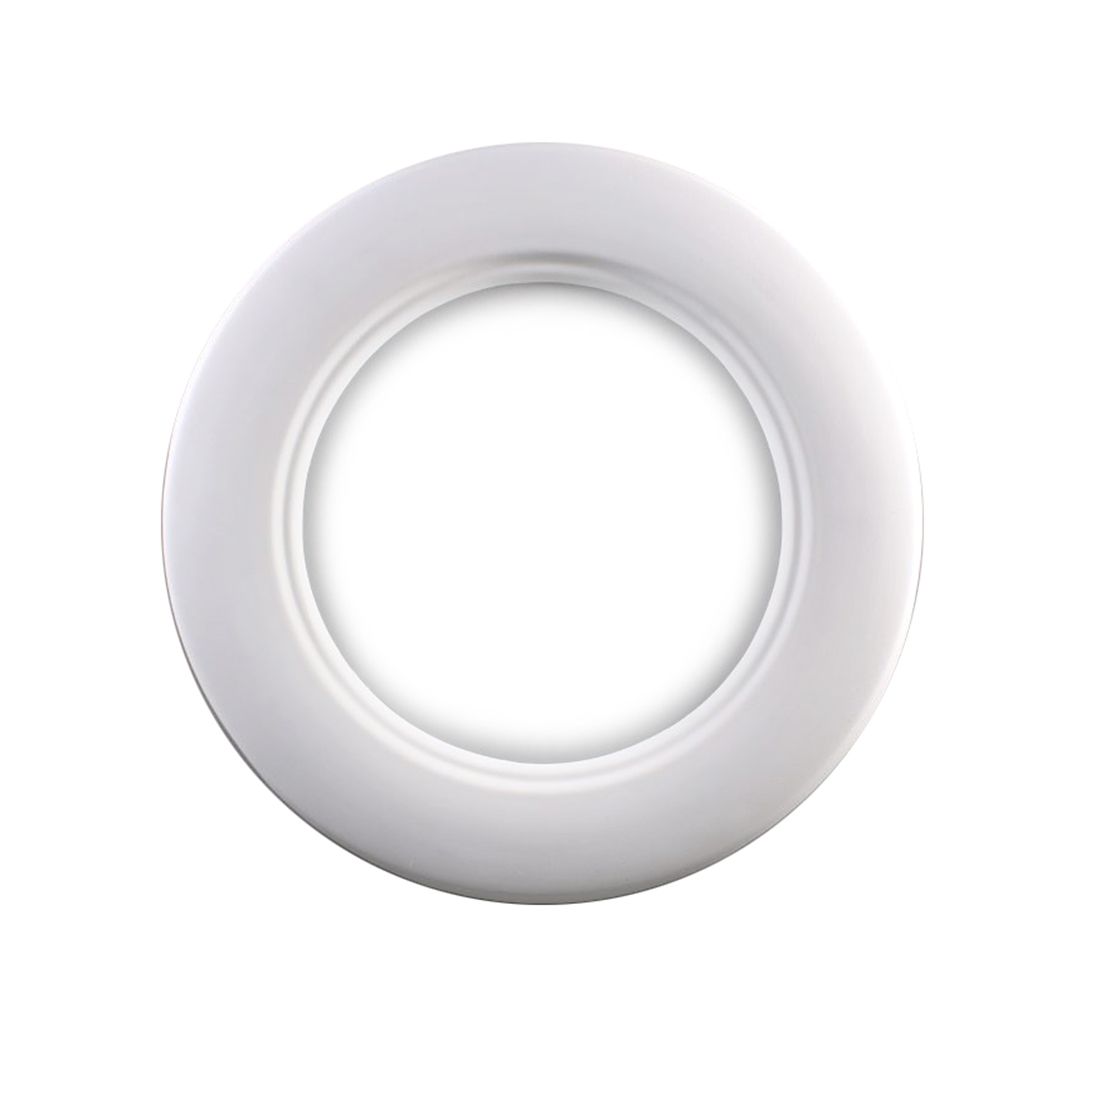 PLATE RING MOLD - 10.25" by CPI